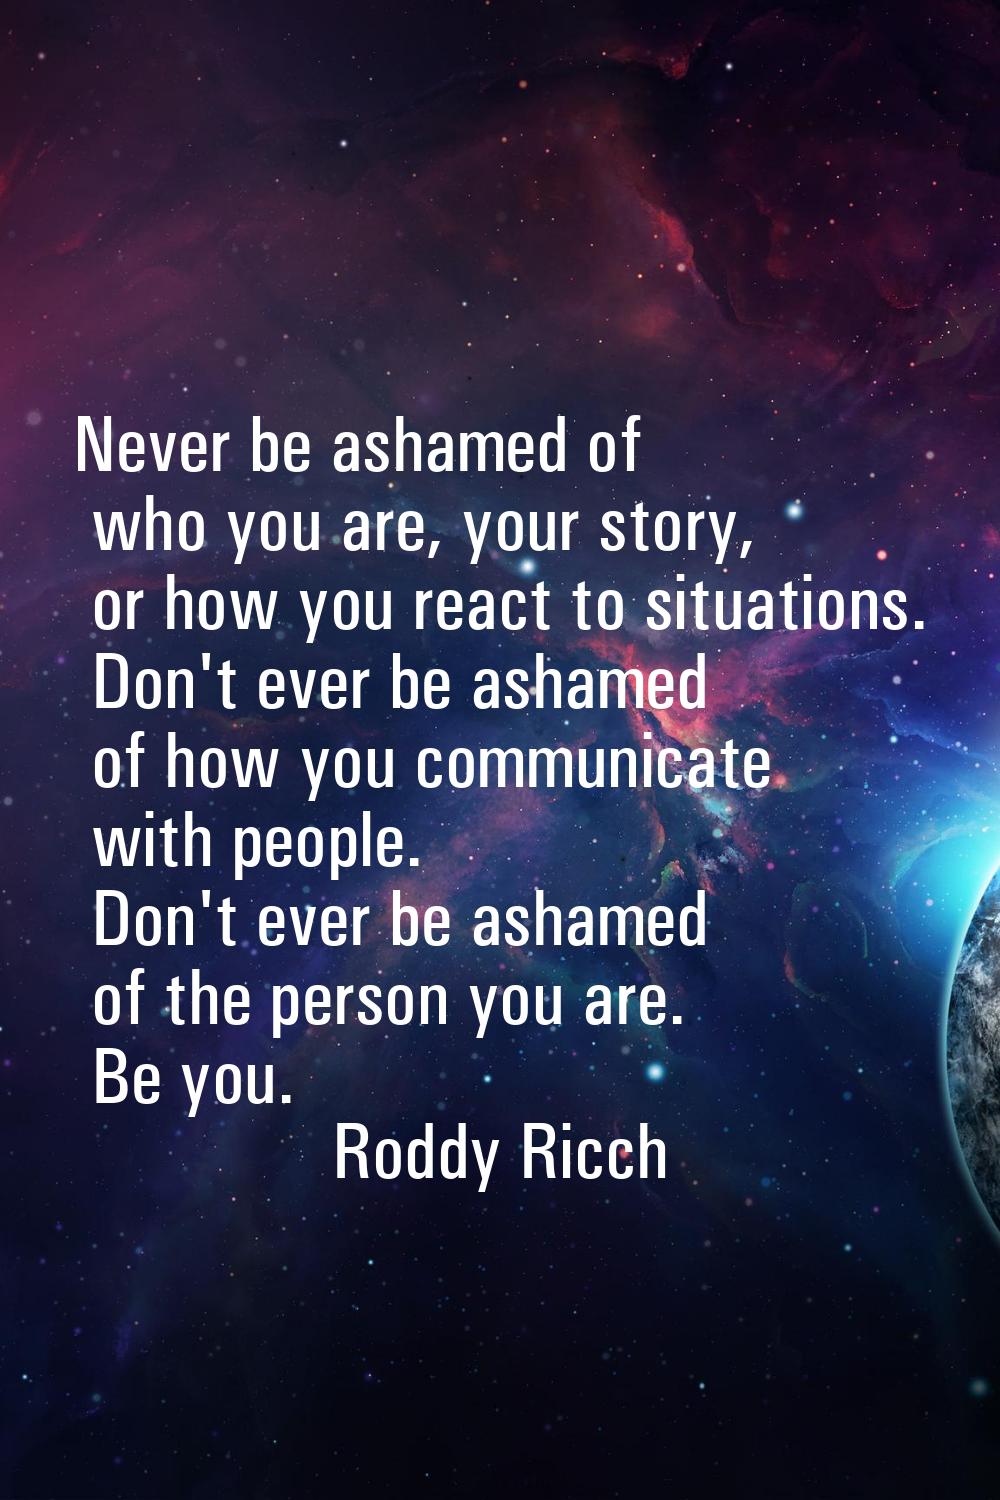 Never be ashamed of who you are, your story, or how you react to situations. Don't ever be ashamed 